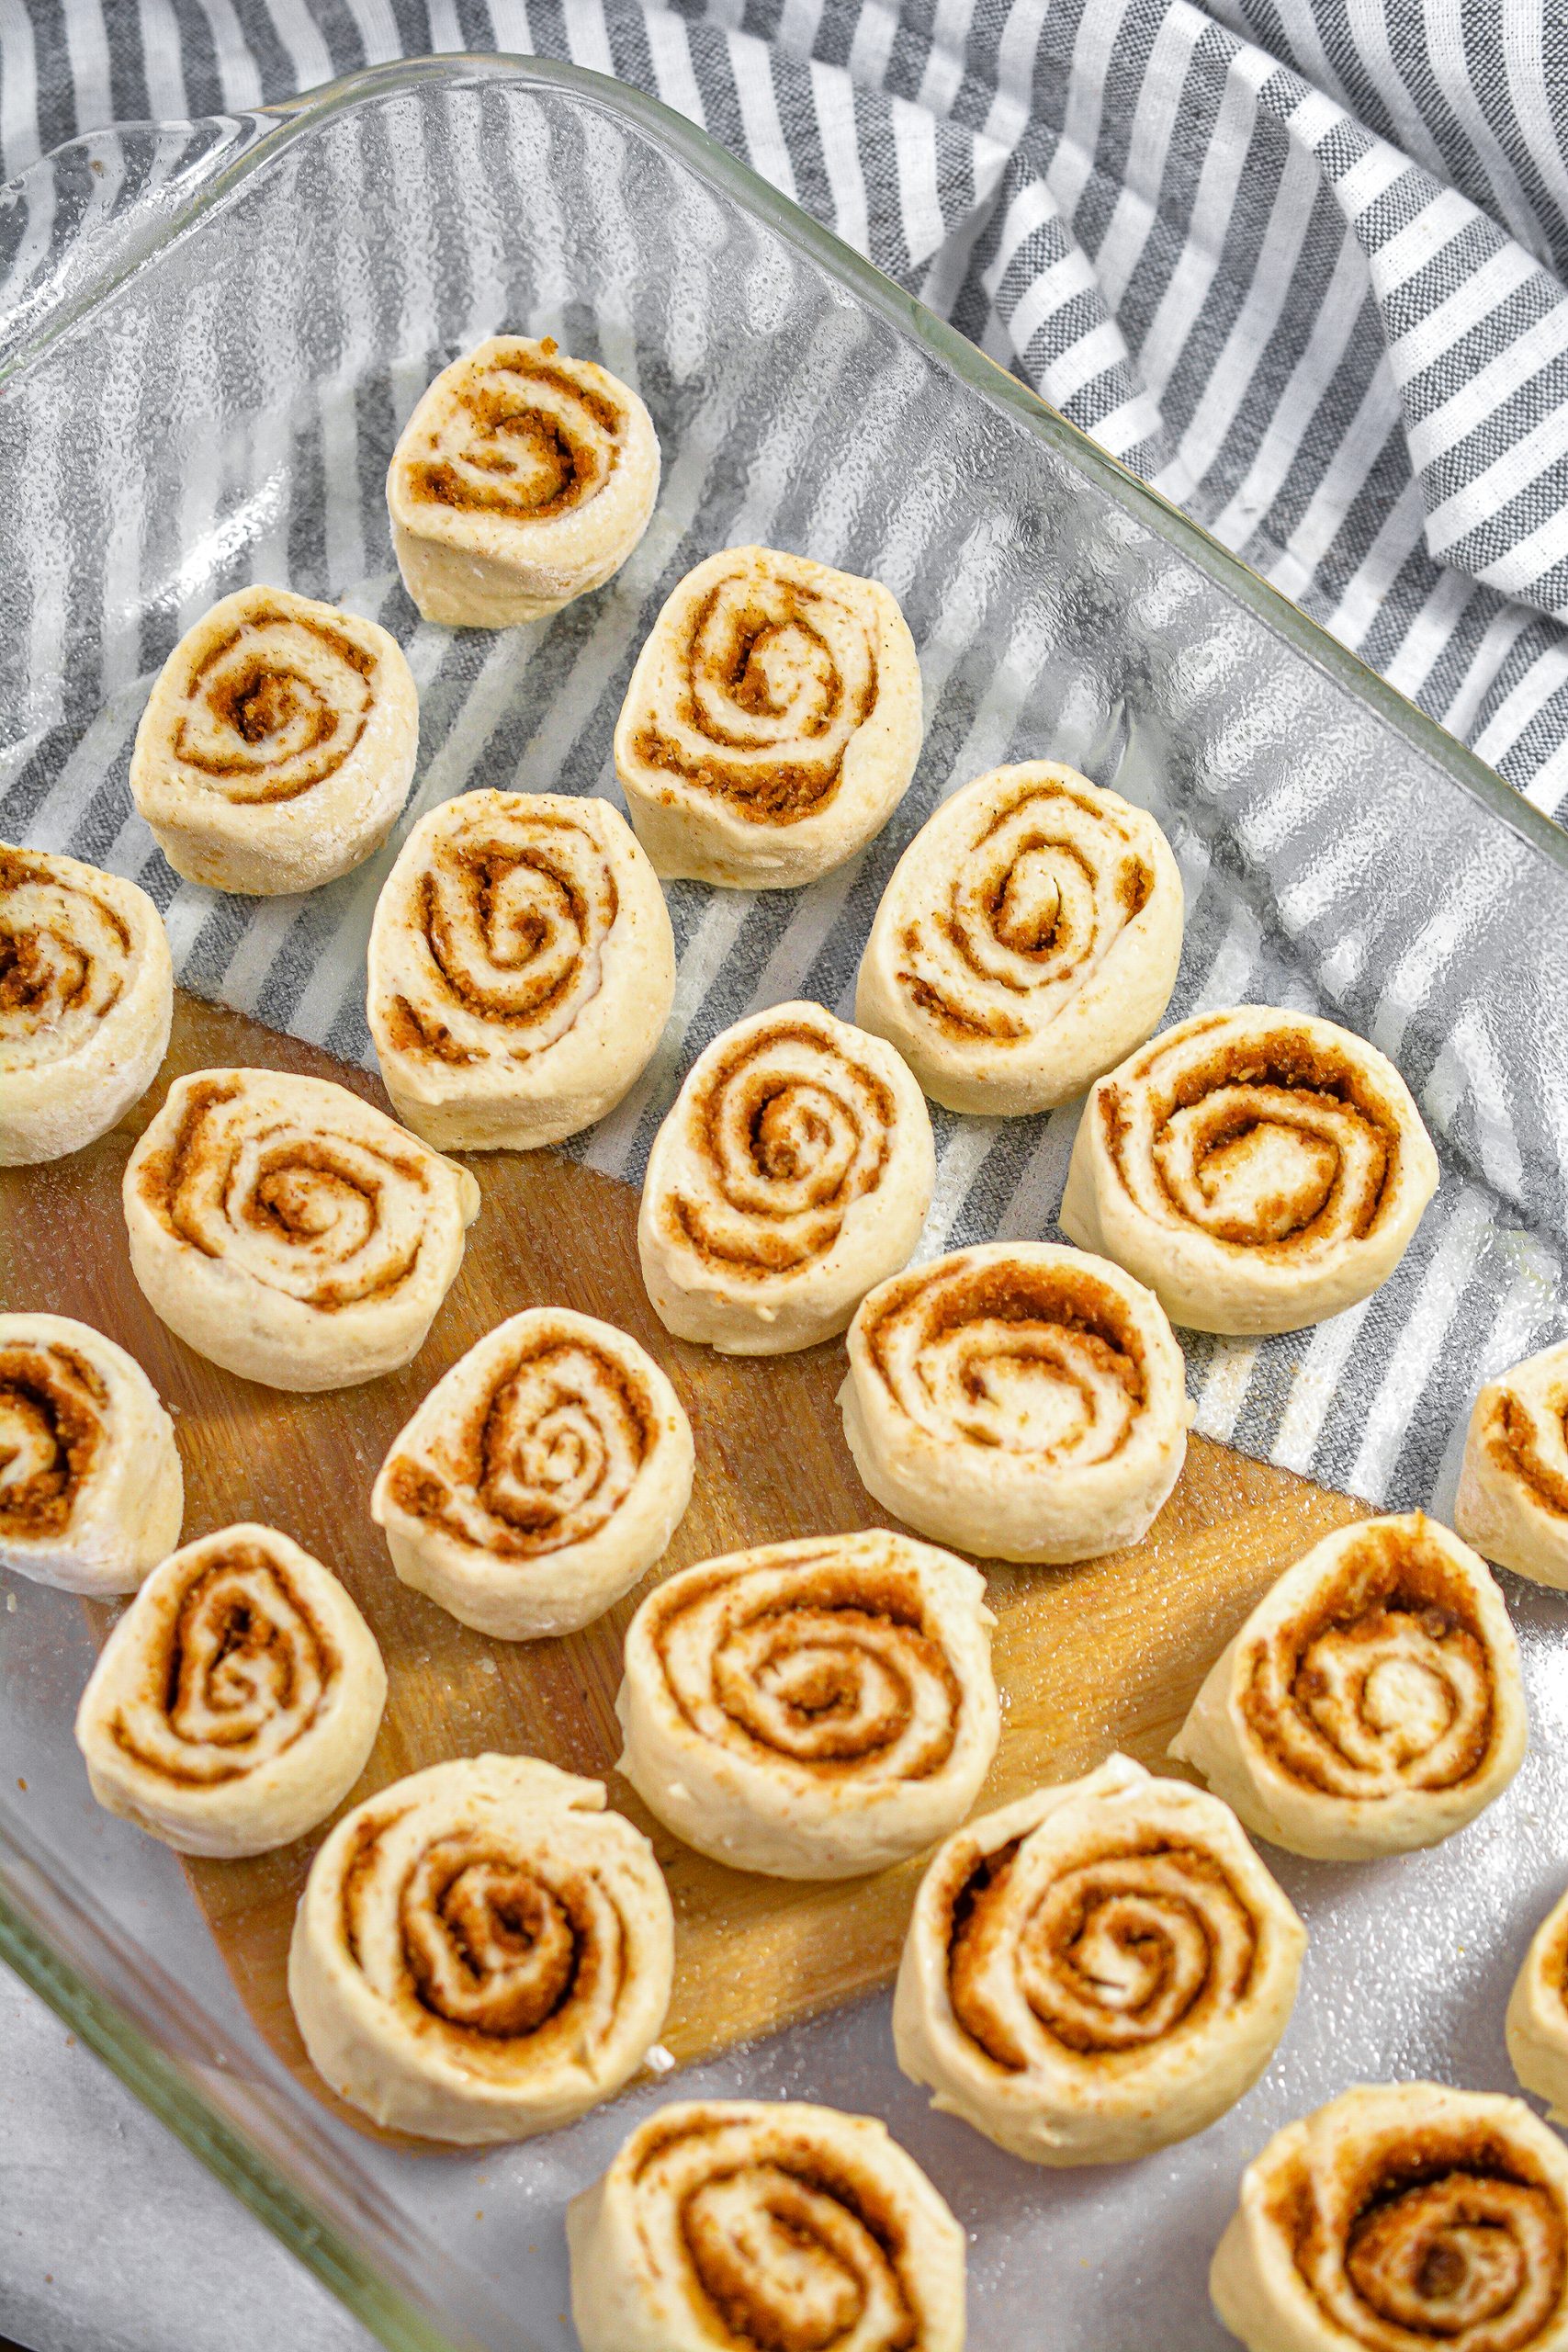 Place the cinnamon rolls flat side down into a well-greased 9x13 baking dish.